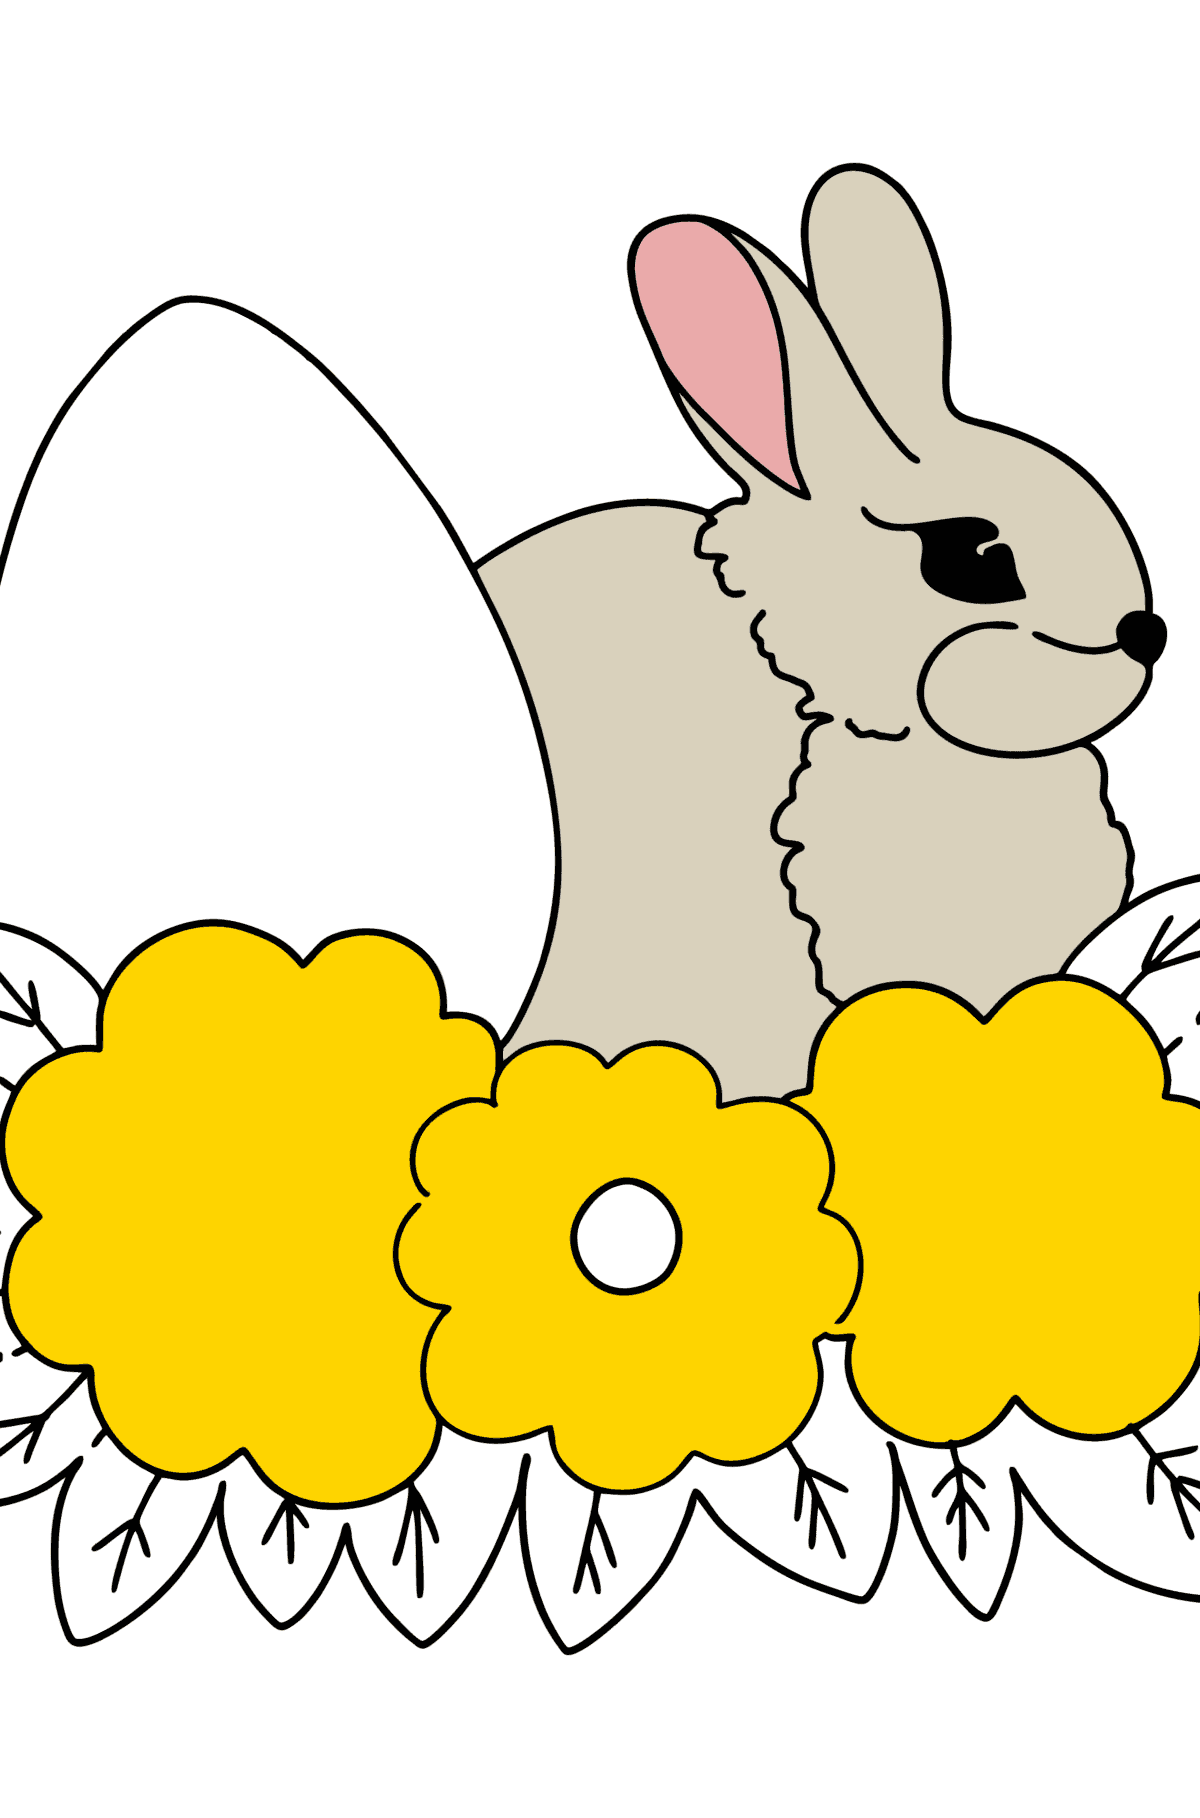 Bunny and Easter coloring page - Coloring Pages for Kids